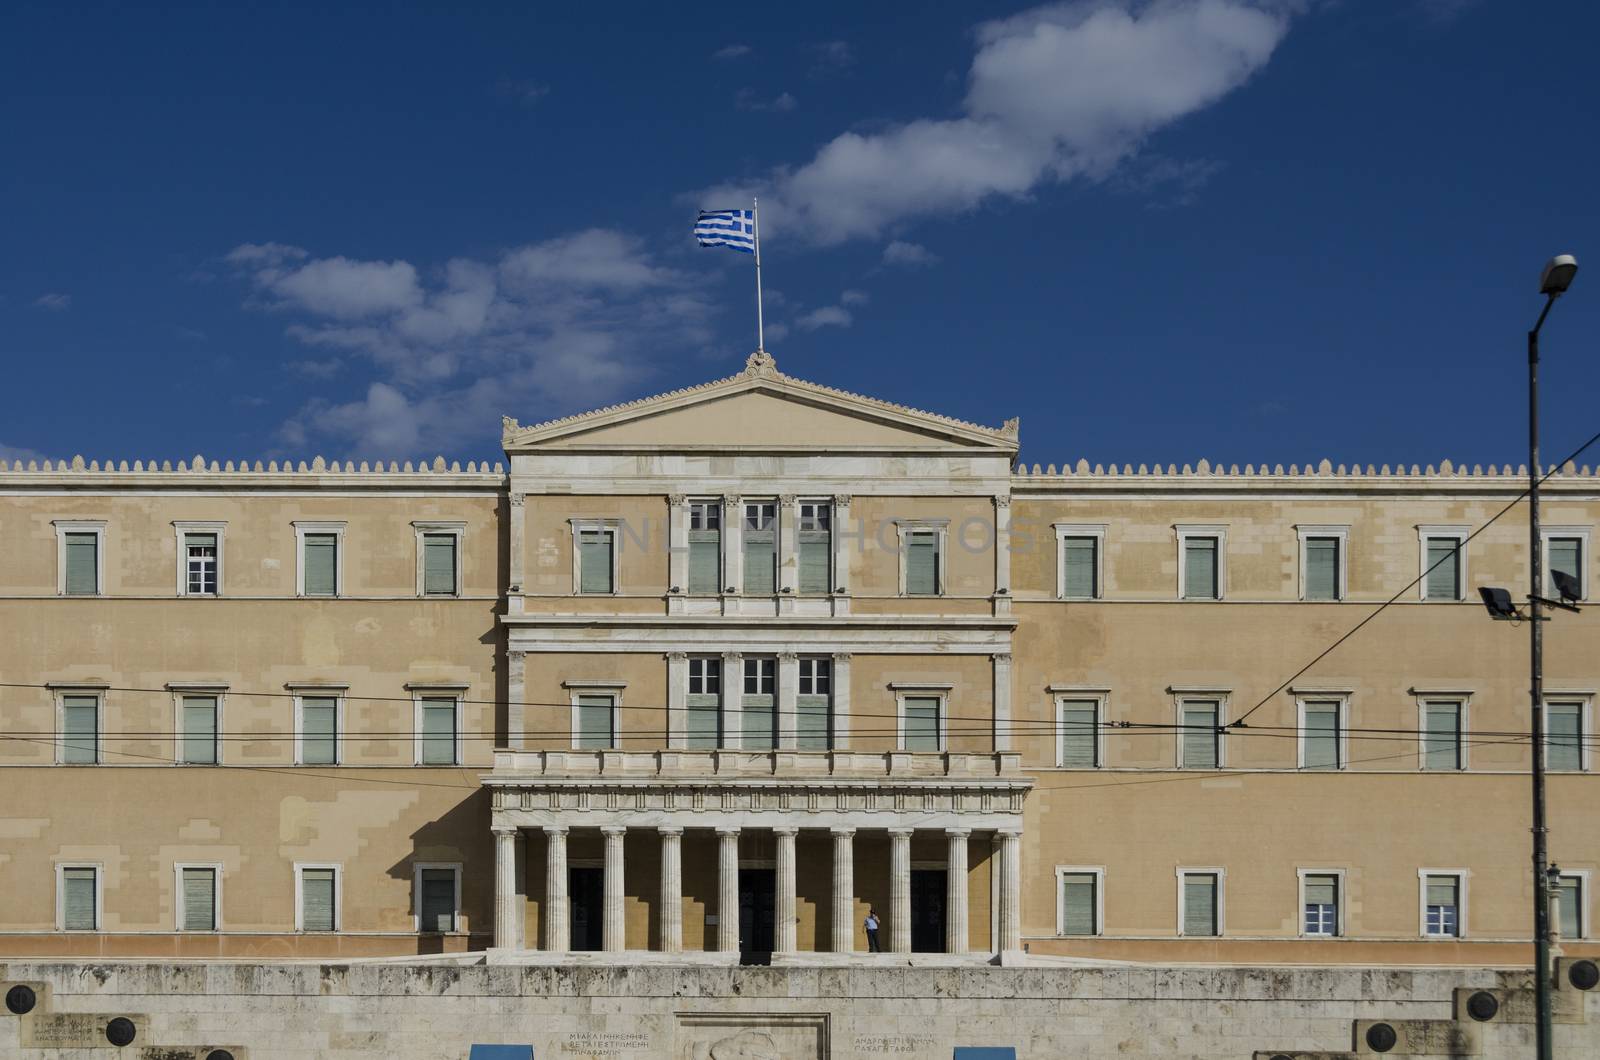 view of the greek parliament building located in syntagma square